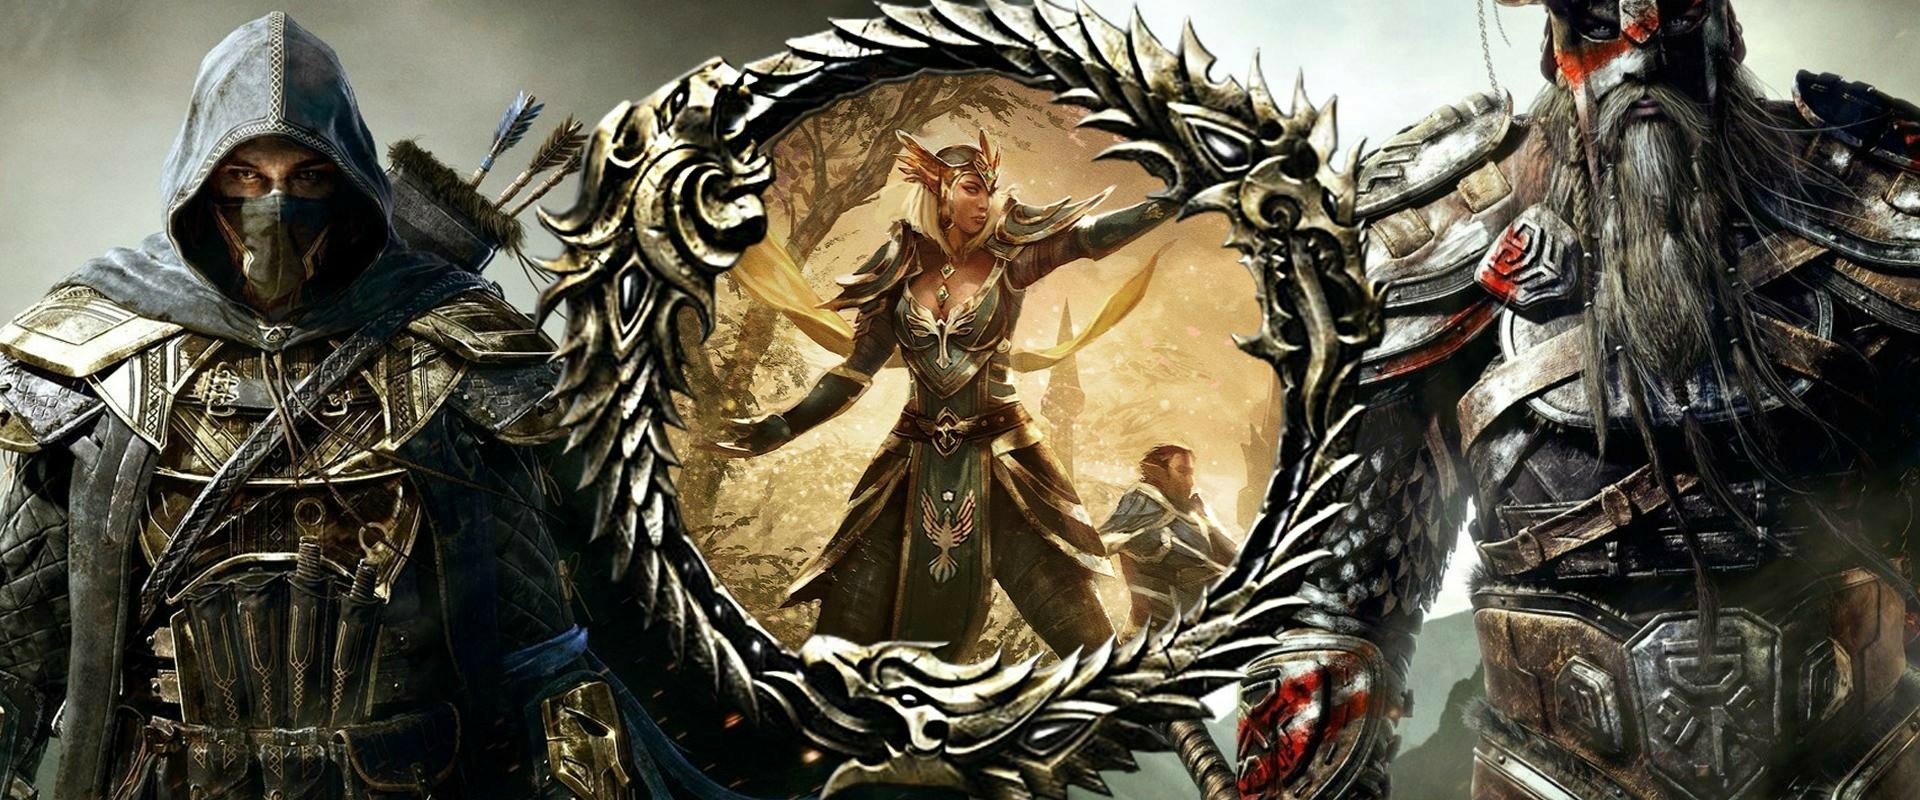 The Elder Scrolls Online Wallpaper and Background Image | 1920x800 | ID